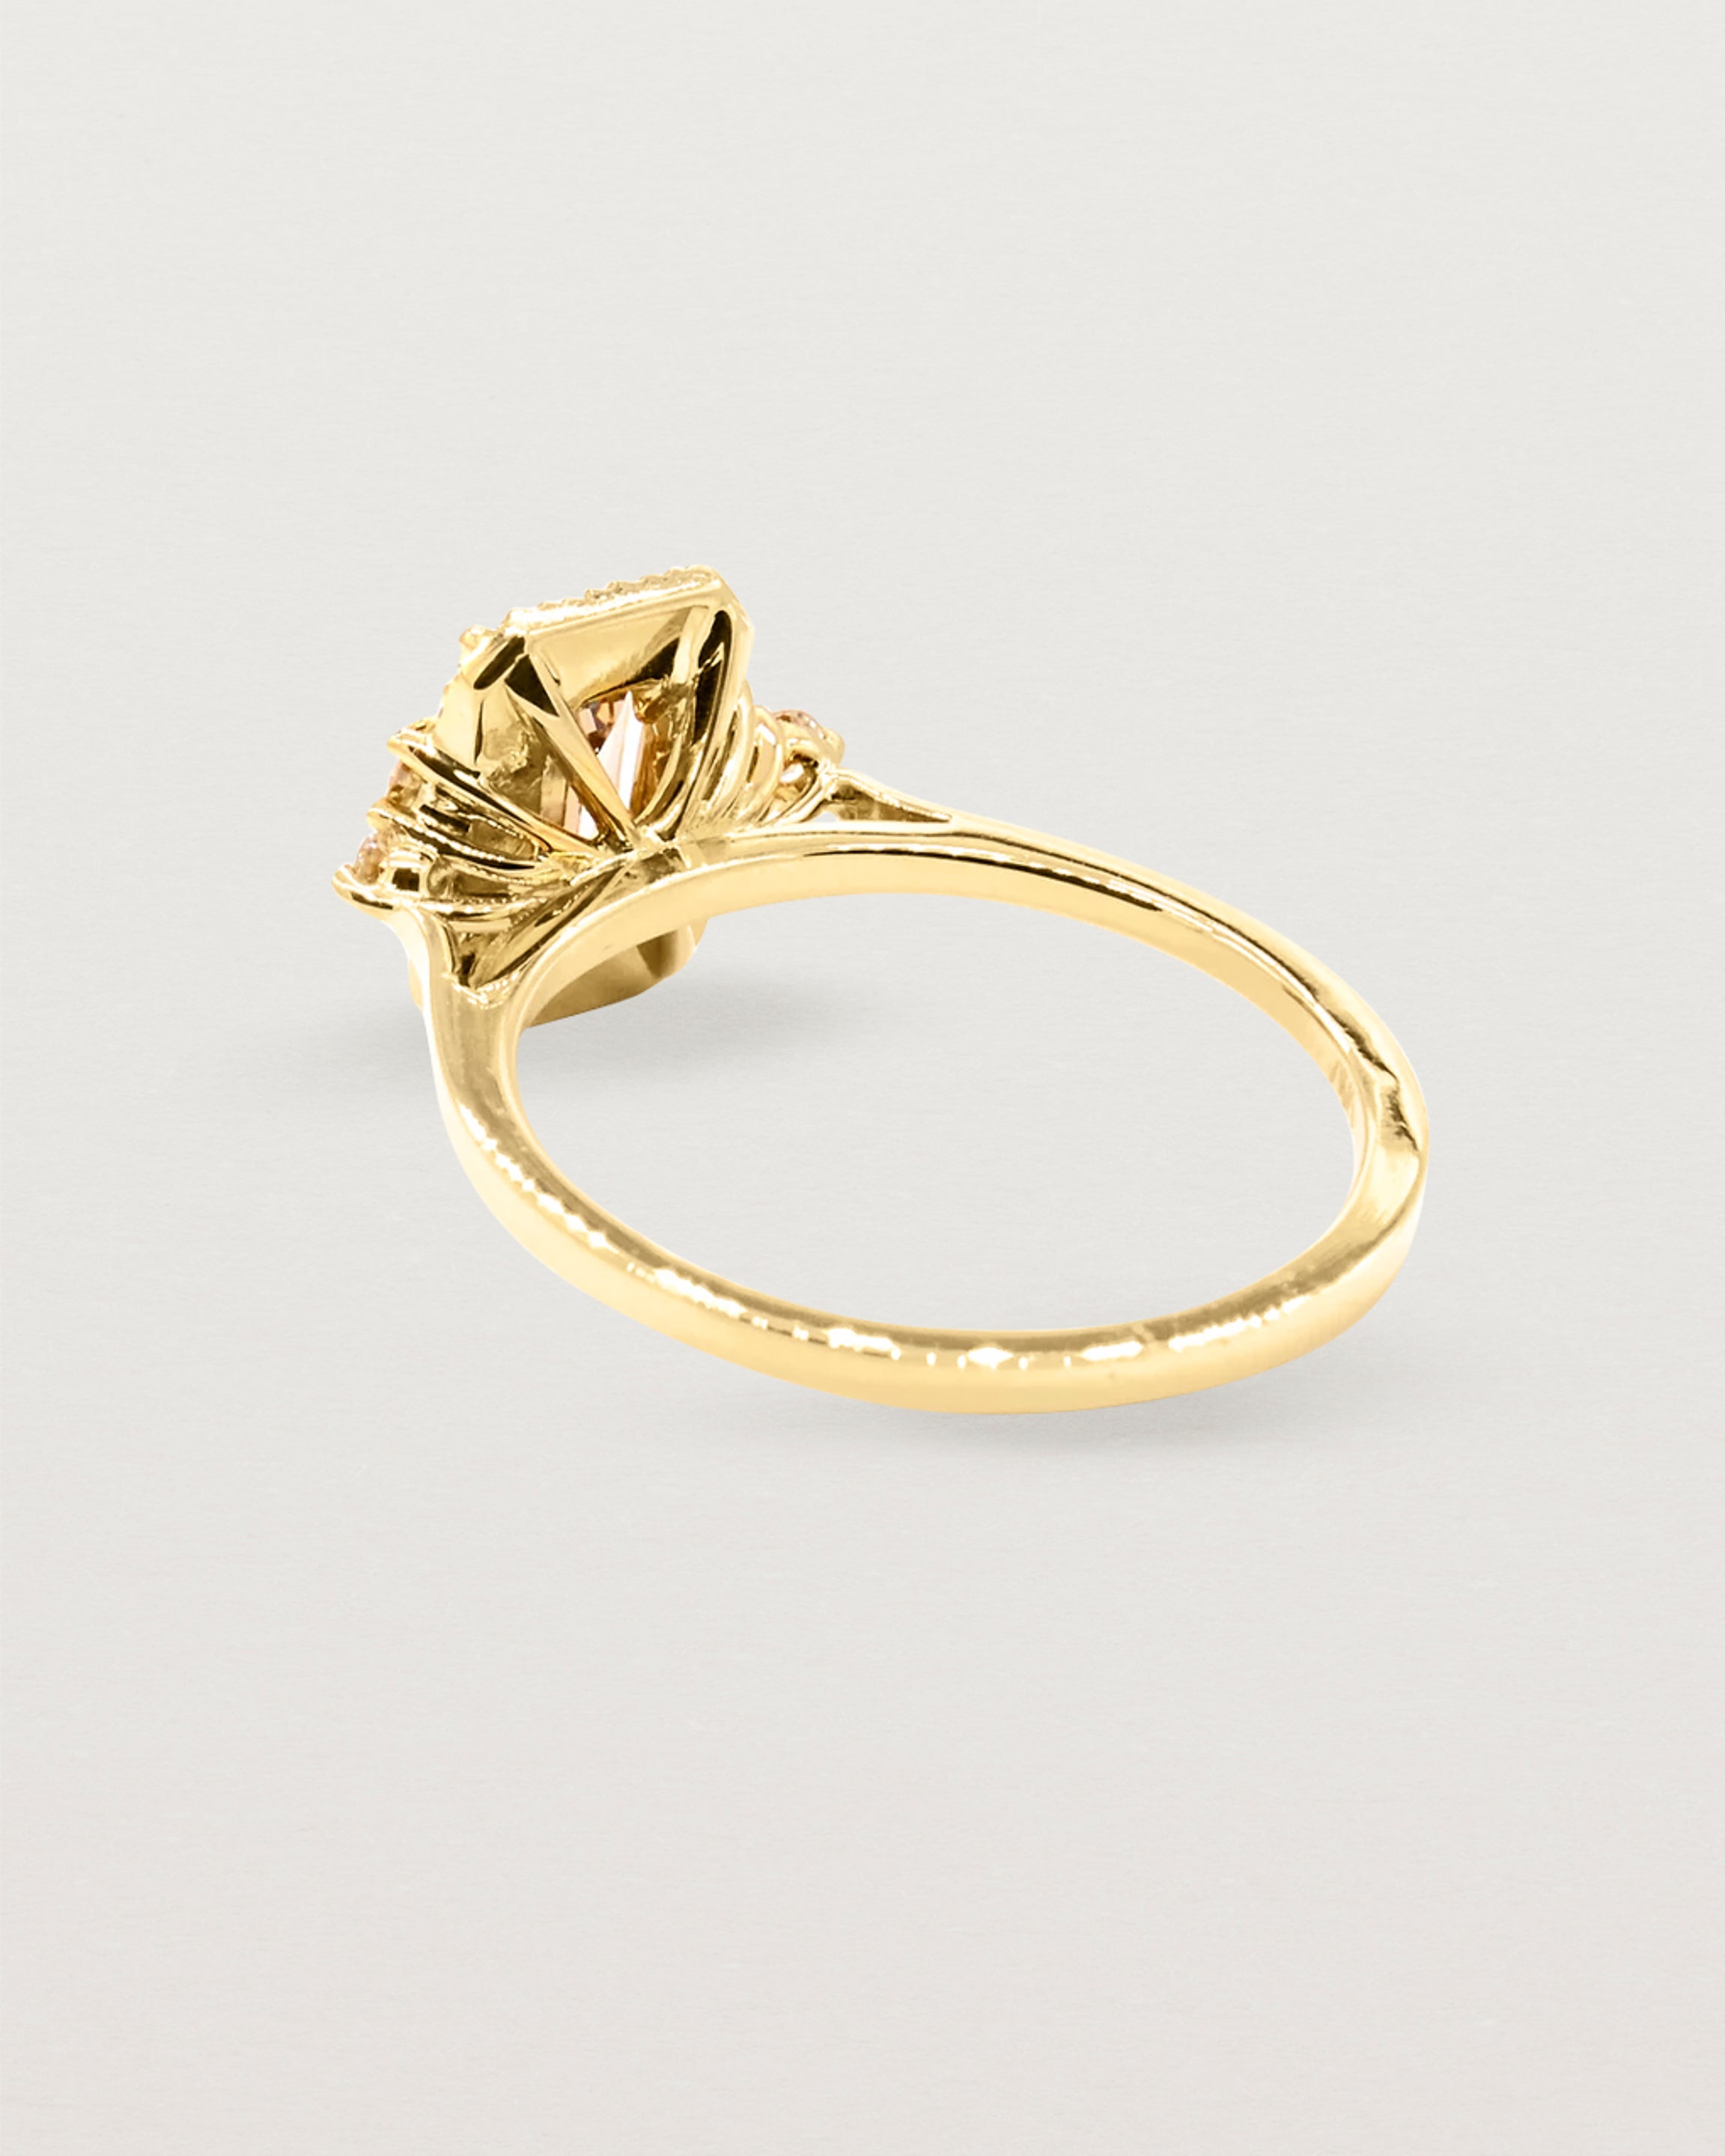 Back view of a yellow gold halo ring